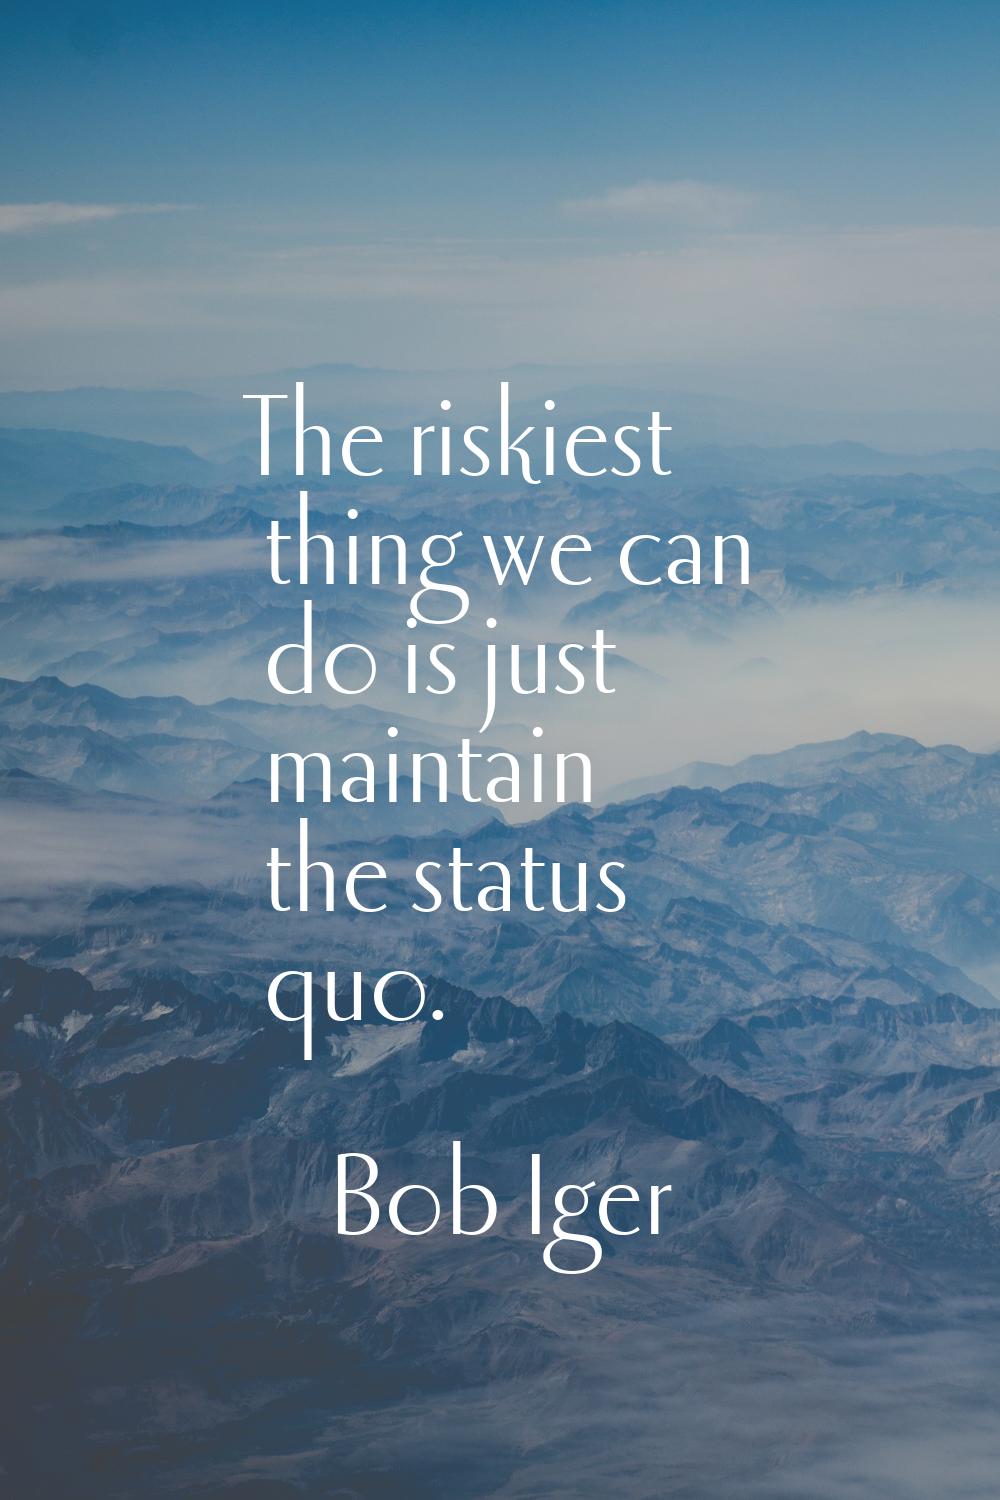 The riskiest thing we can do is just maintain the status quo.